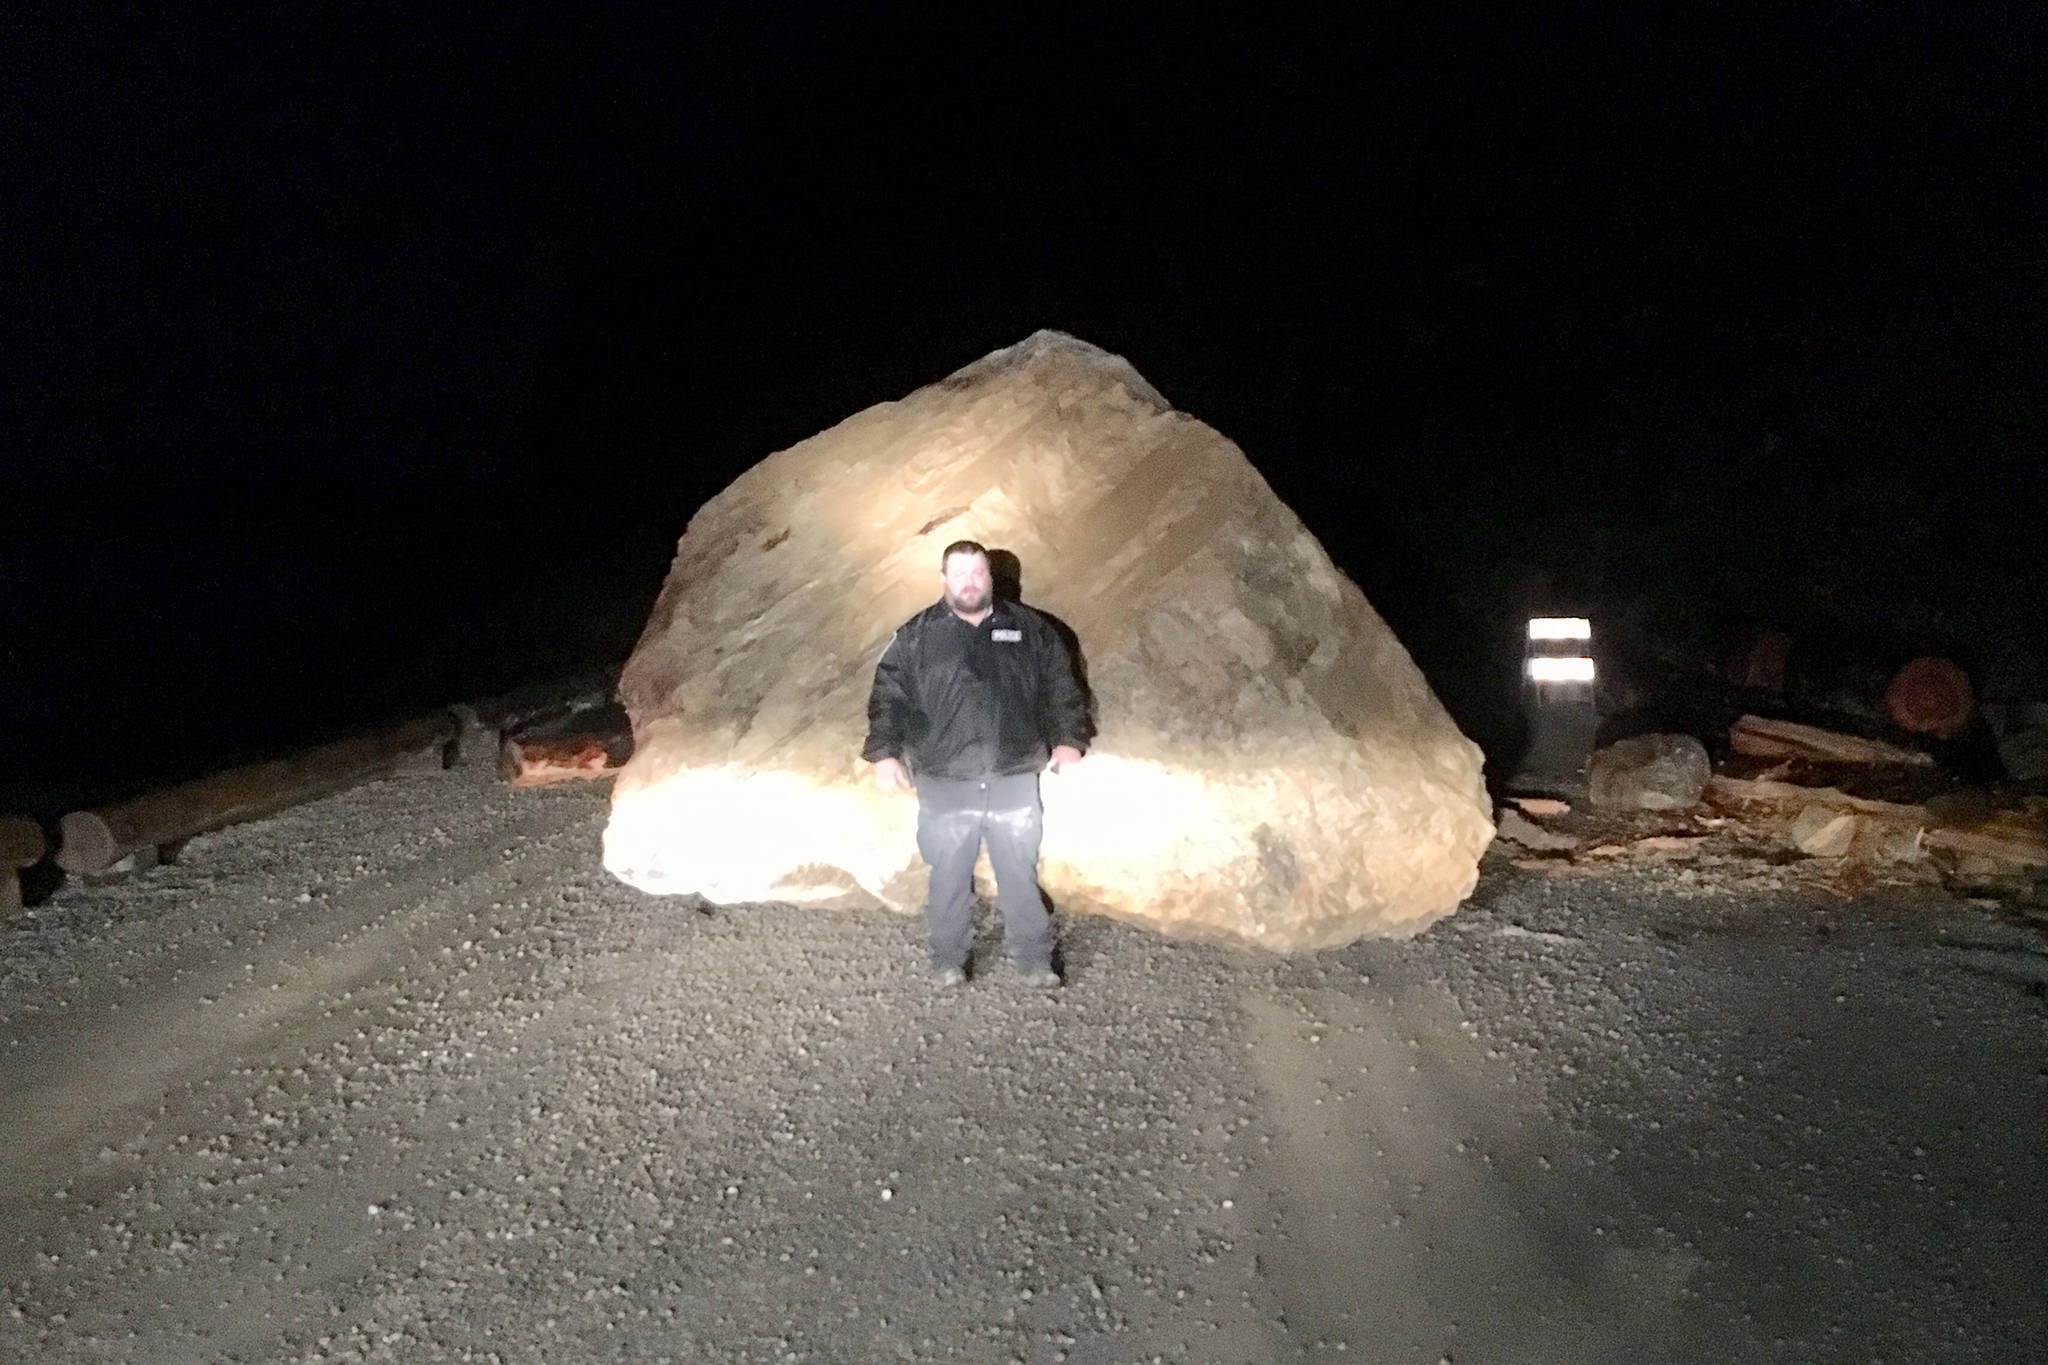 A man poses with a large boulder that fell on a Hoonah road in the early hours of Sunday, Nov. 25, 2018. Nobody was harmed. (Courtesy Photo | Hoonah Volunteer Fire Department)